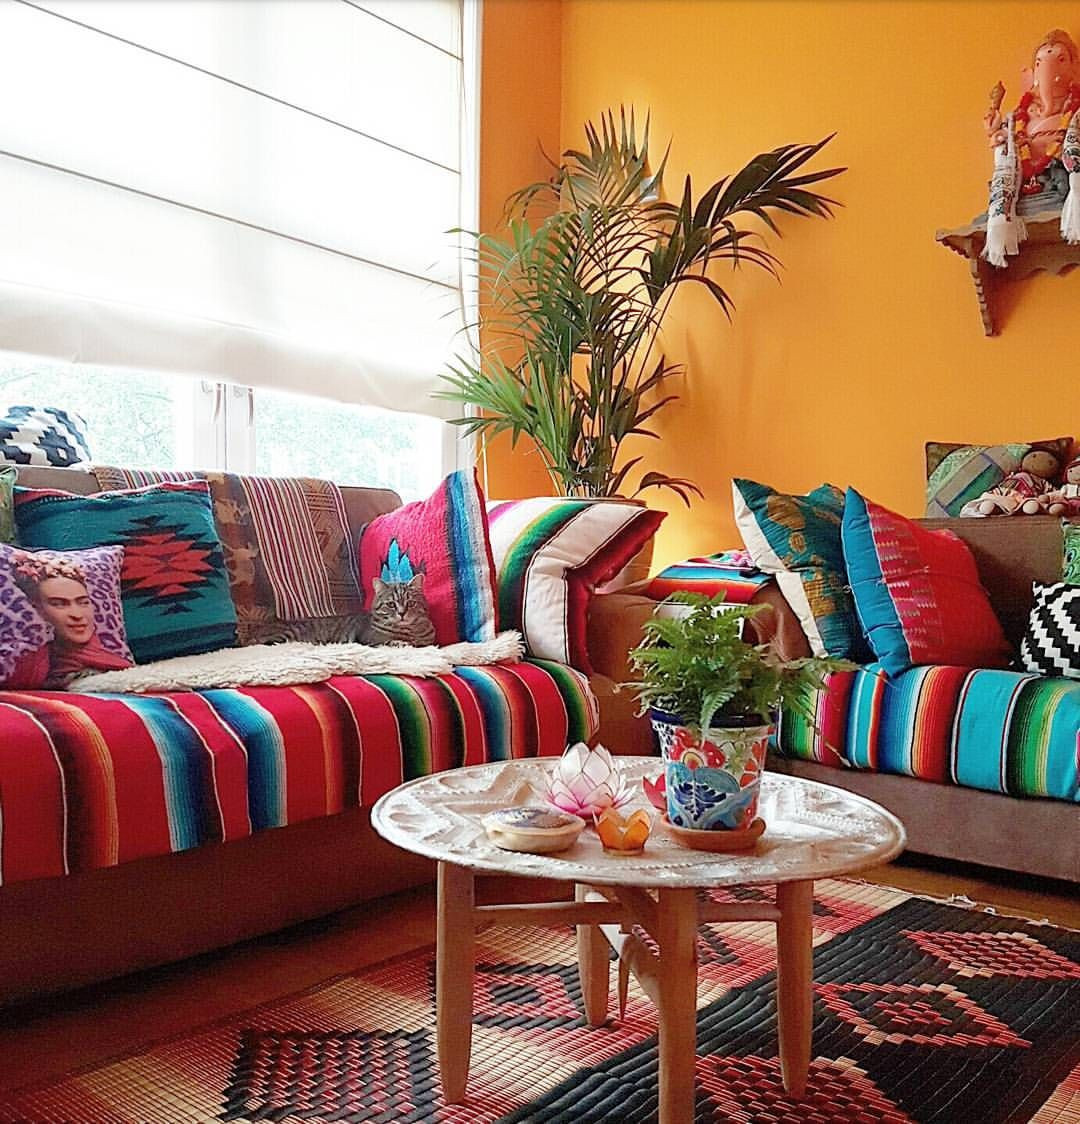 Mexican Living Room Decor
 I love this room and what a colorful solution if your